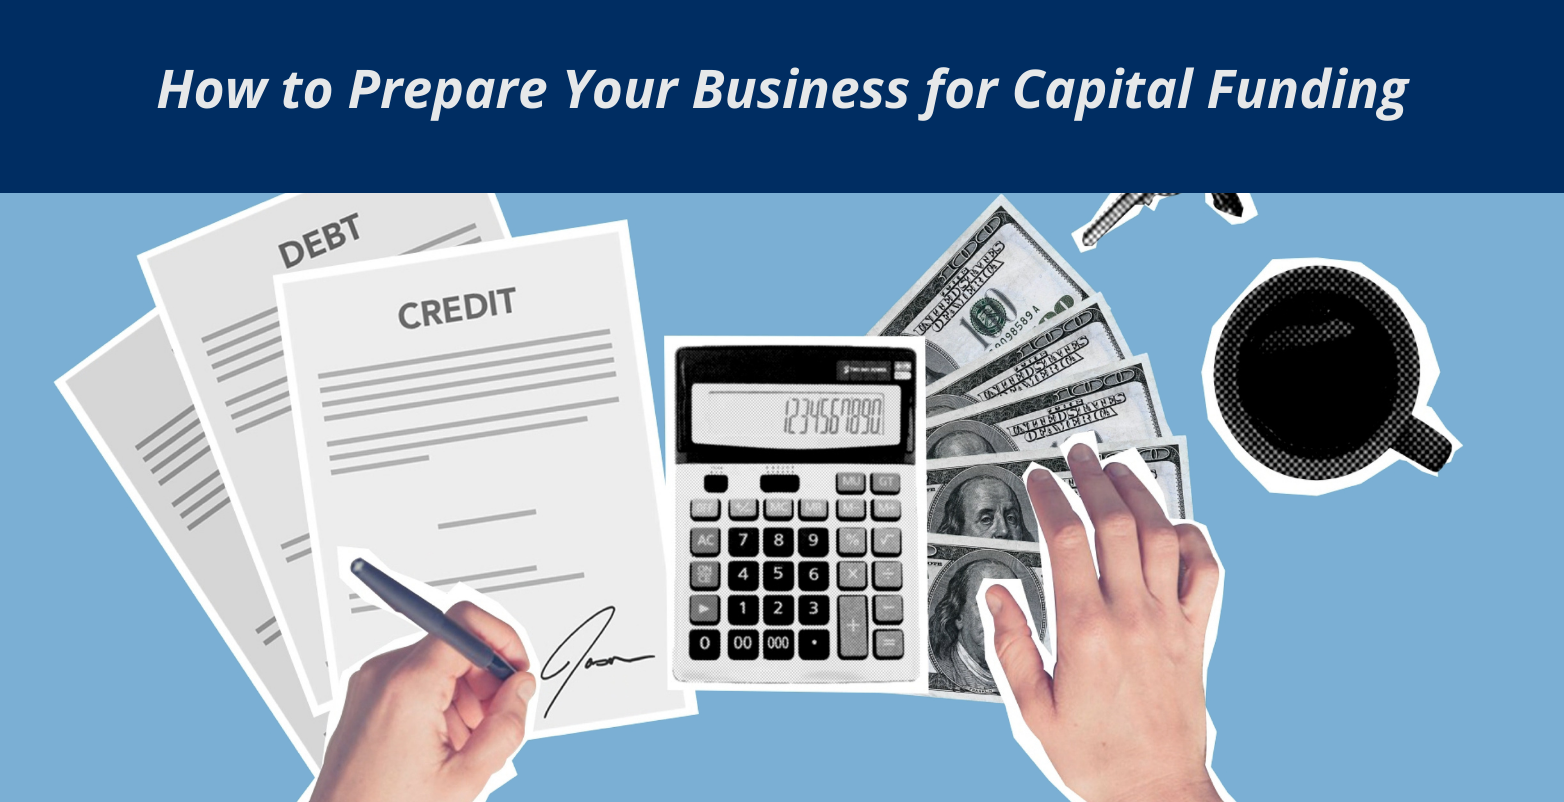 How to Prepare Your Business for Capital Funding